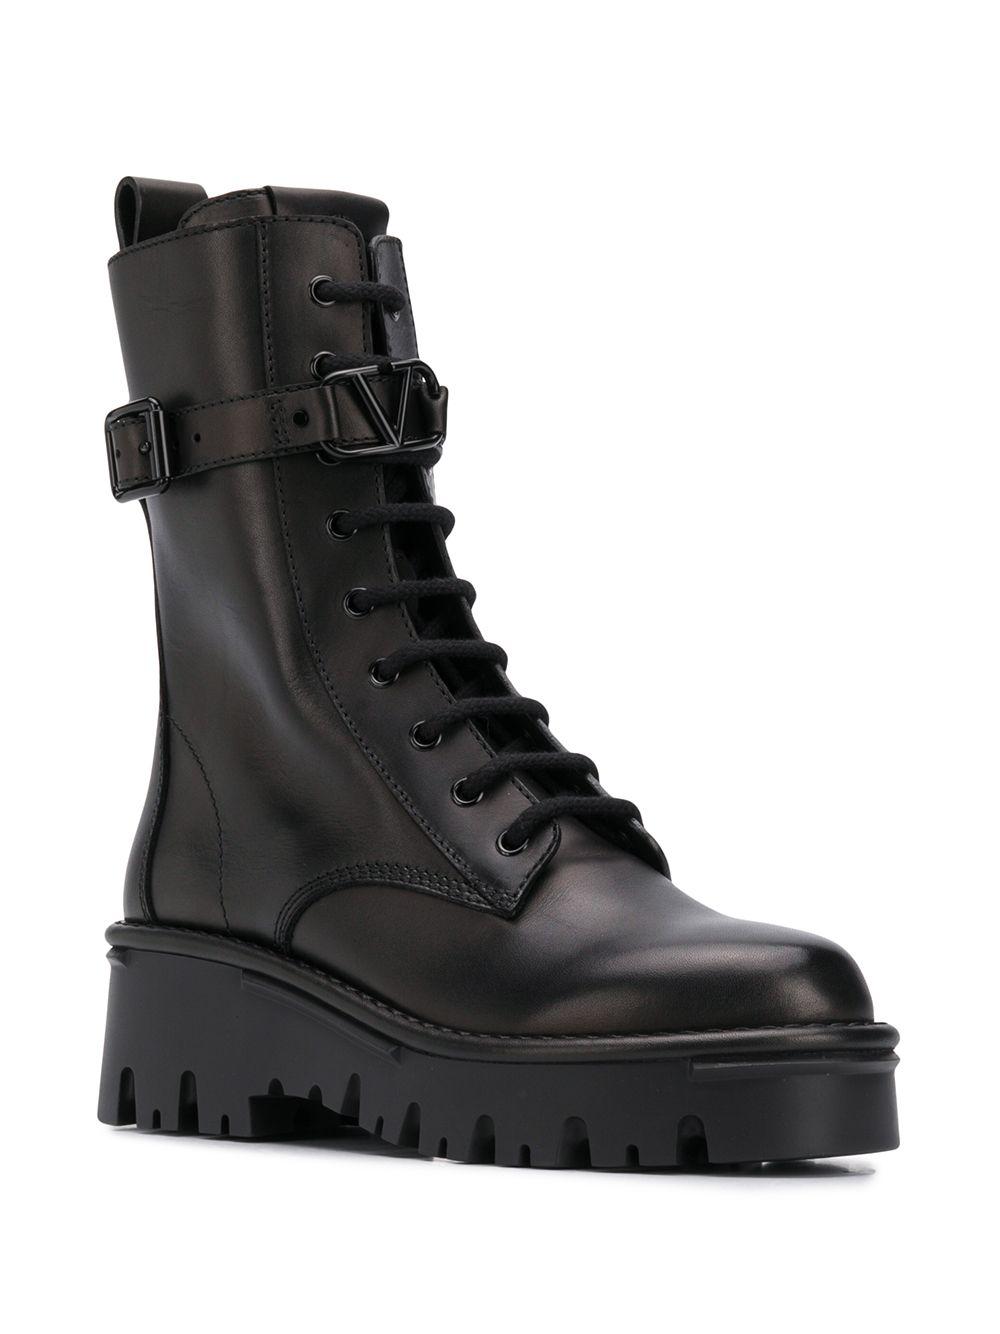 Valentino Garavani Leather Lace-up Military Boots in Black - Lyst